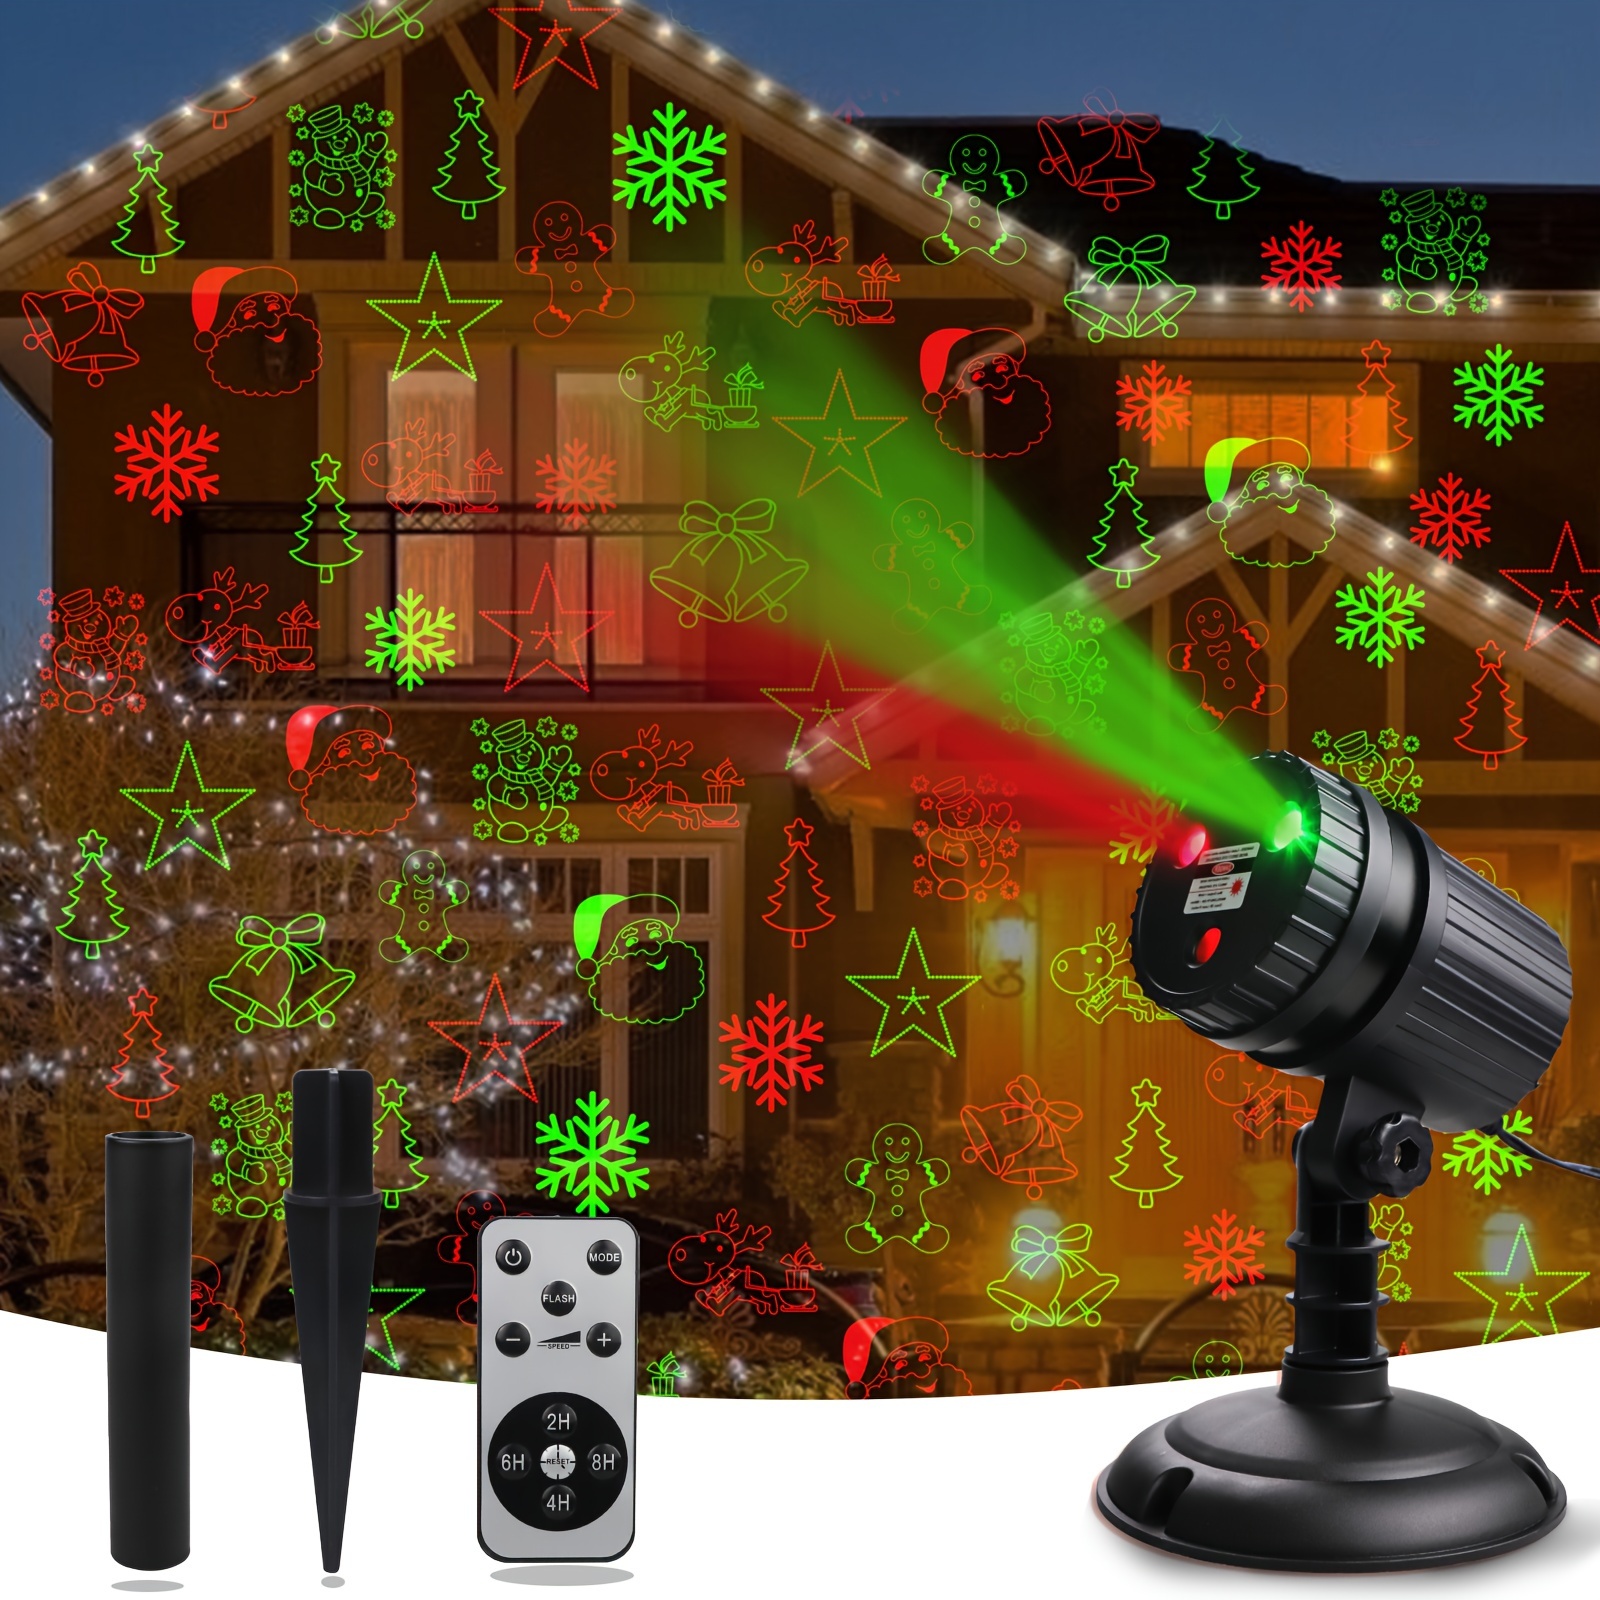 

Christmas Laser Lights Projector - Outdoor Xmas Decoration, Remote Control, 8 Patterns For Yard, Patio